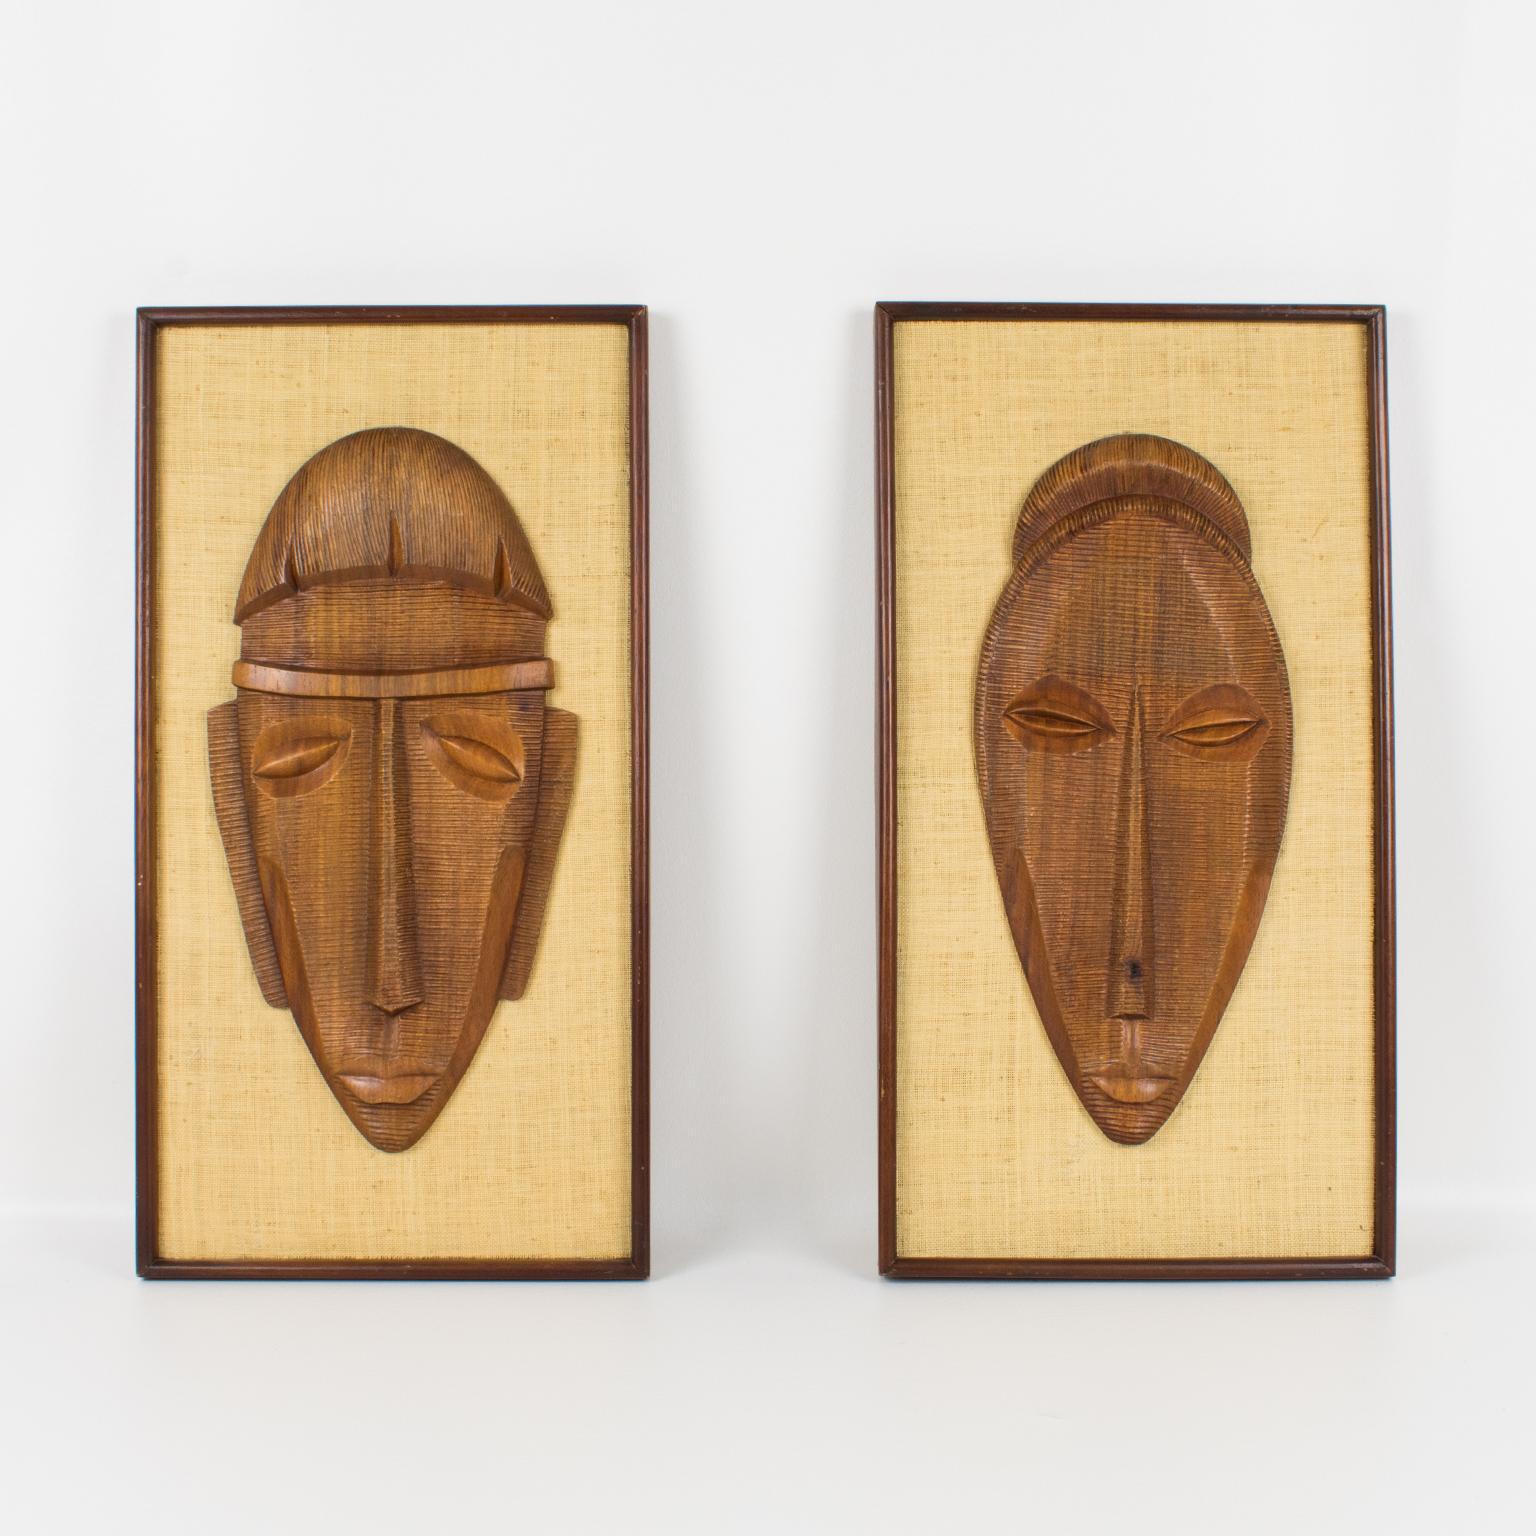 Mid-Century Carved Wood Relief Mask Wall Sculpture Panel, a pair For Sale 1